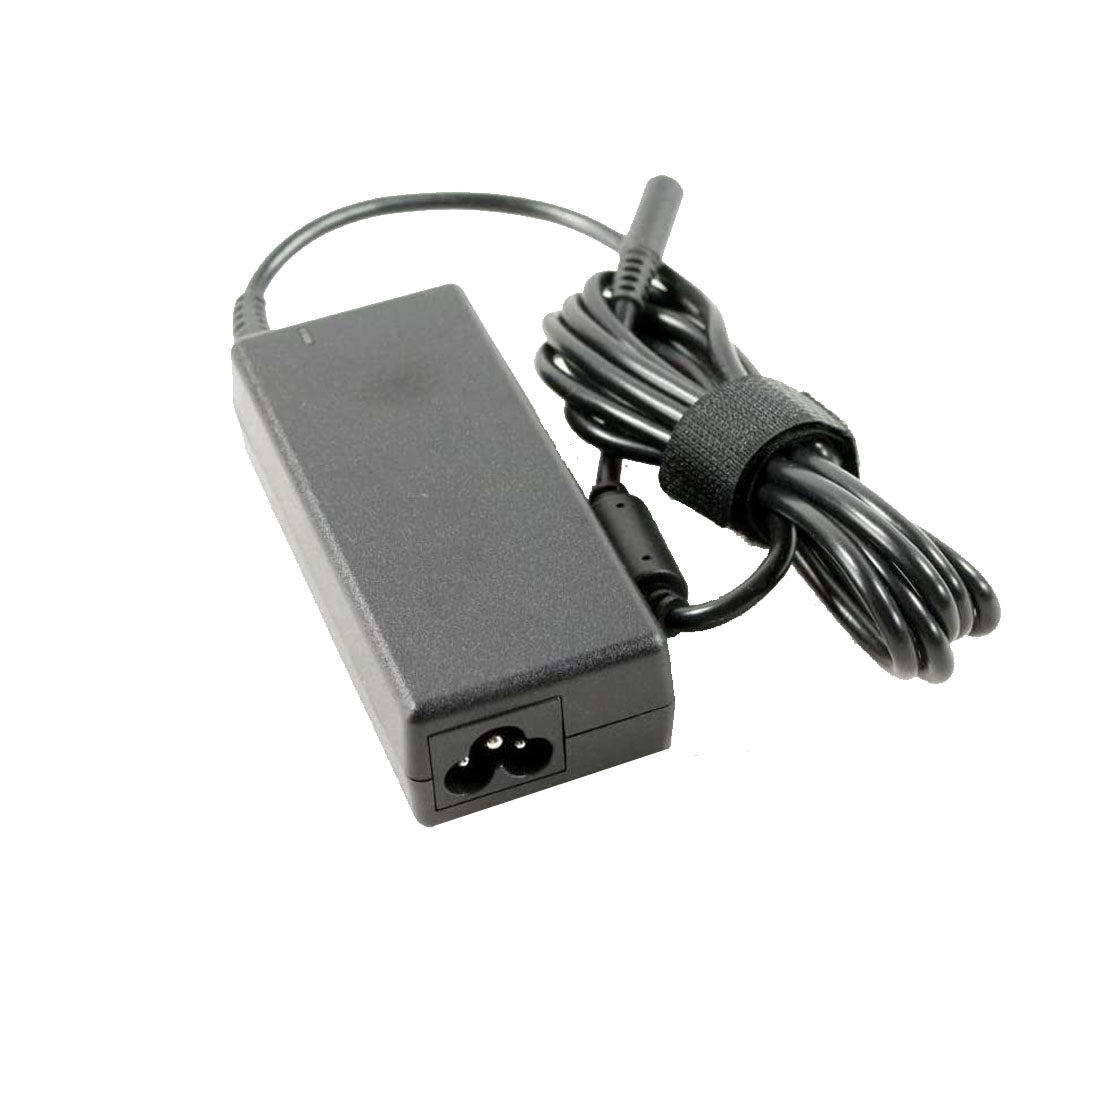 Dell Original 65W 19.5V 4.5mm Pin Laptop Charger Adapter for XPS 13 L322X With Power Cord